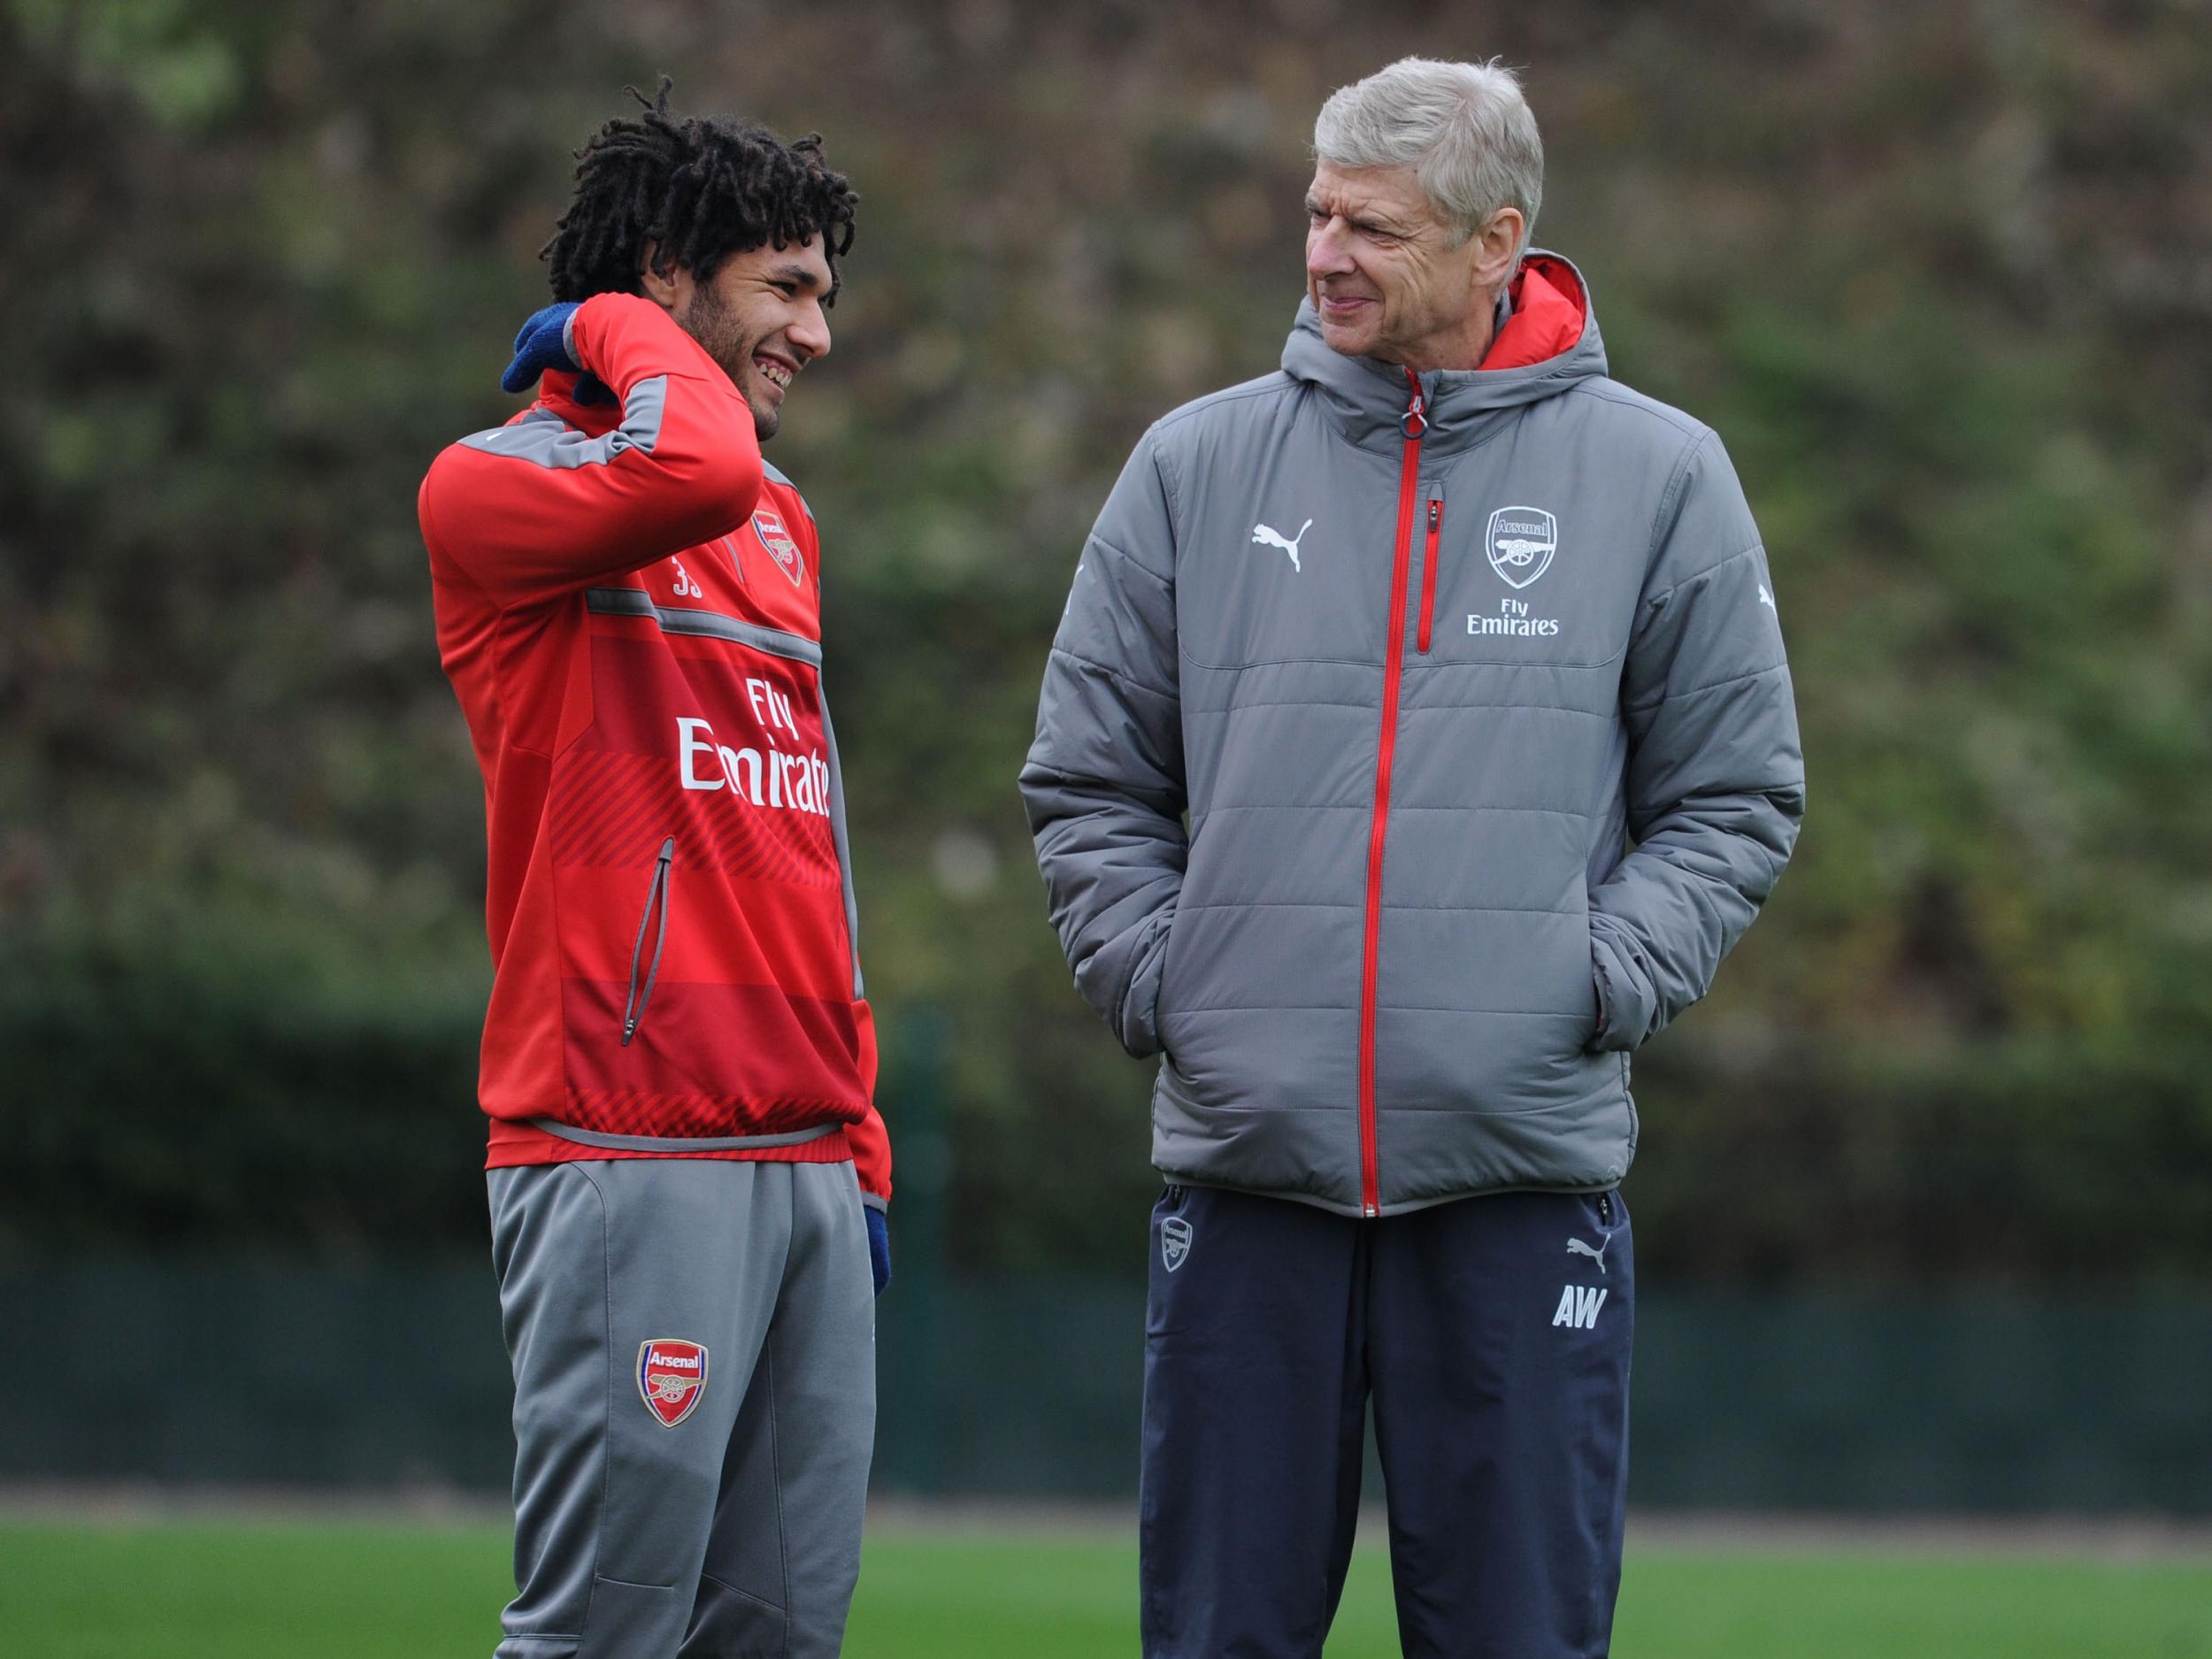 Elneny was signed as a defensive midfielder but Wenger has faith he can play a deeper role